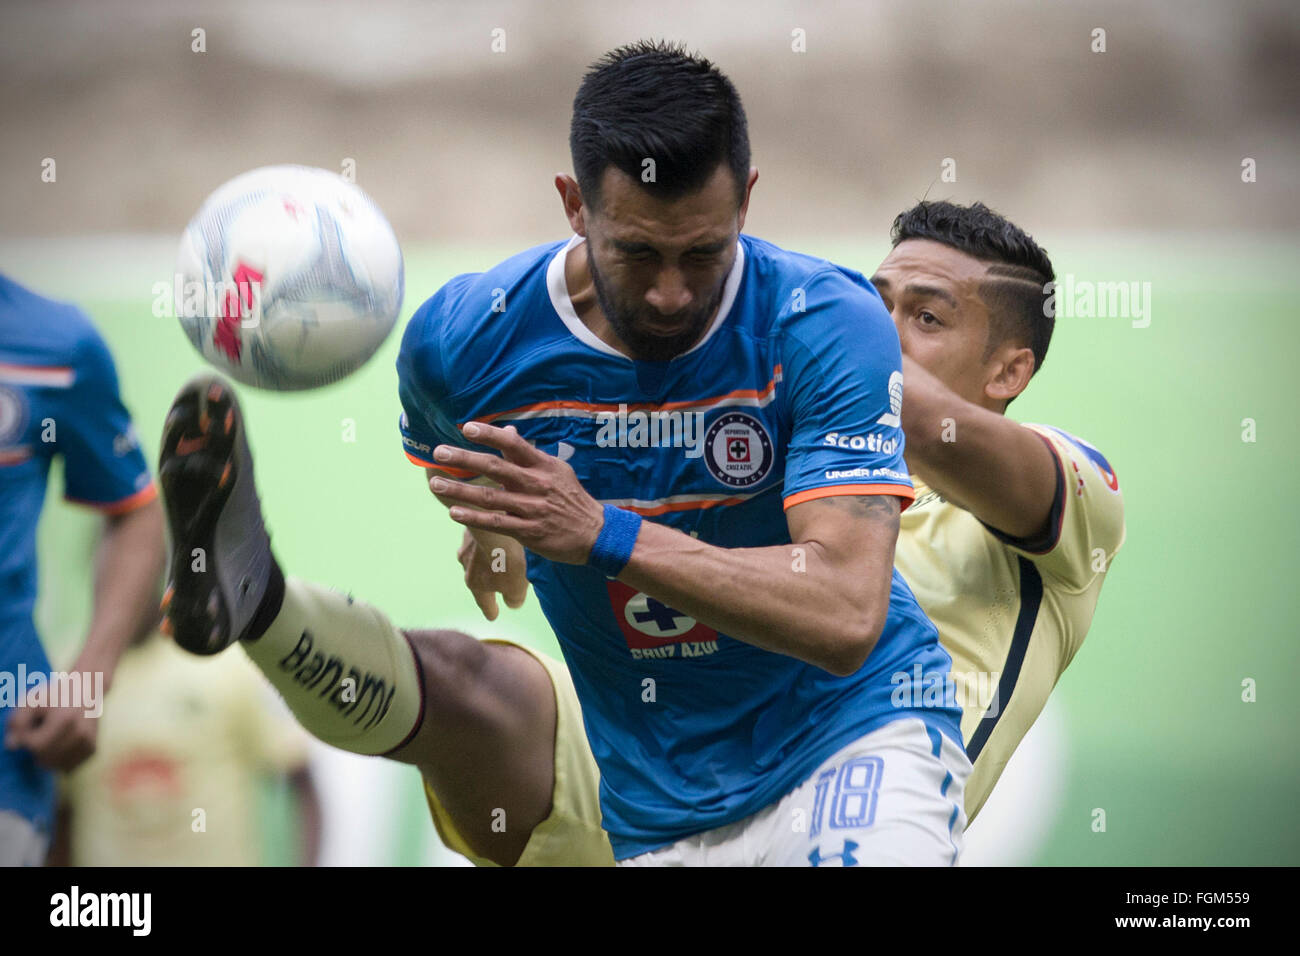 Mexico City, Mexico. 20th Feb, 2016. America's Andres Andrade (R) vies for the ball with Cruz Azul's Ariel Rojas during the match of Day 7 of Closing Tournament of MX League at Azteca Stadium in Mexico City, capital of Mexico, on Feb. 20, 2016. © Alejandro Ayala/Xinhua/Alamy Live News Stock Photo